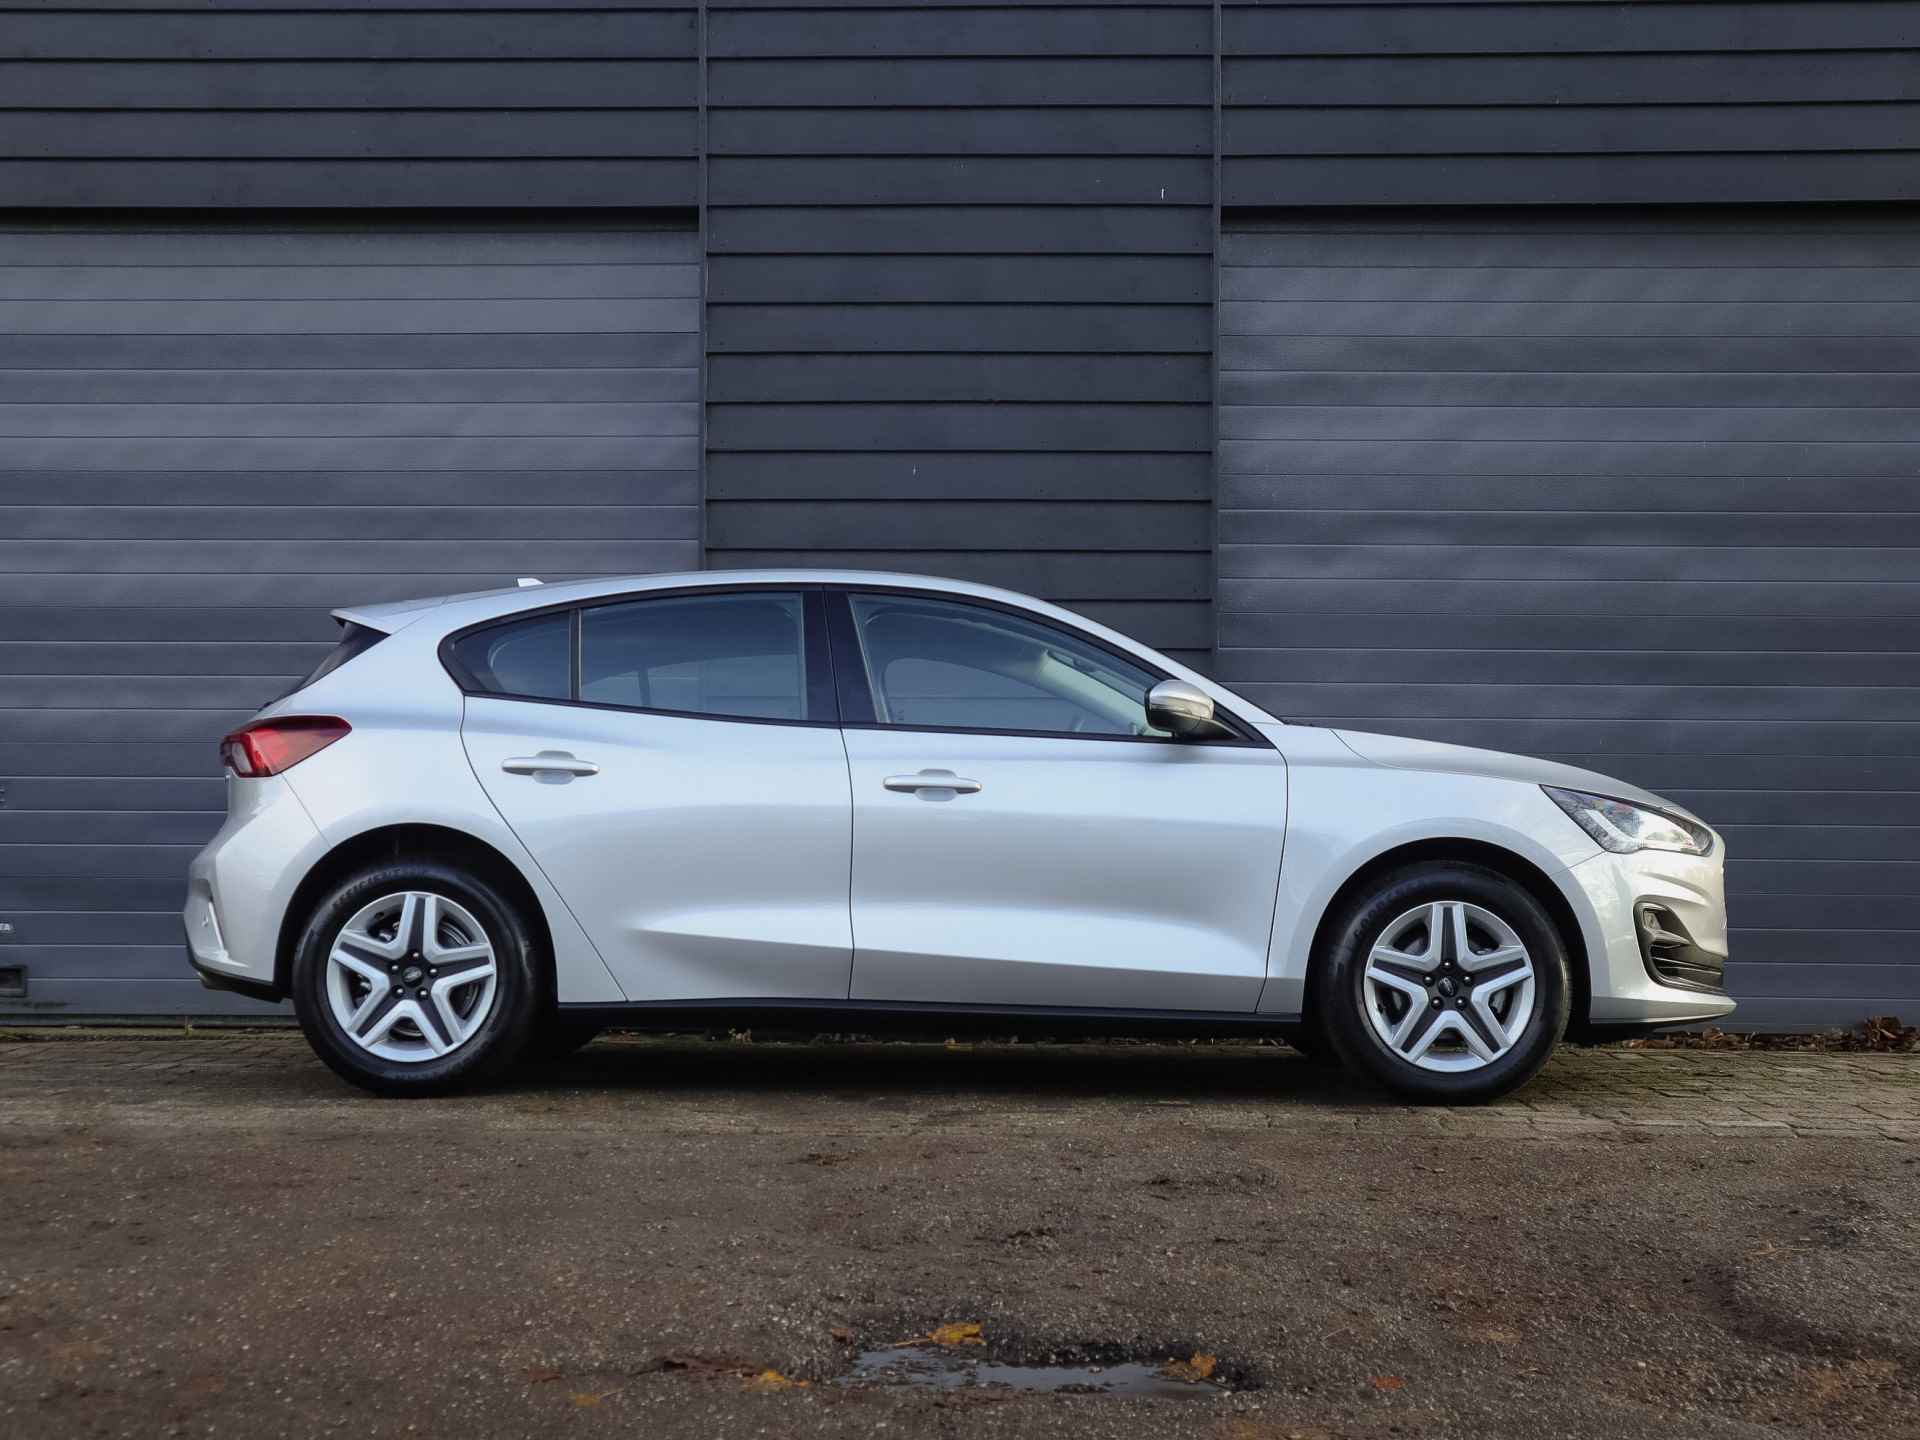 Ford Focus 1.0i Hybrid Connected, (149PK) 1e-Eig, FORD-Dealer-Onderh, 12-Mnd-BOVAG, NL-Auto, Navigatie/Apple-Carplay/Android-Auto, Parkeersensoren-V+A, Cruise-Control, Airco, DAB, Lane-Assist, Privacy-Glas, Sportstoelen, Led-Koplampen, Adaptieve-Cruise-Control - 5/54